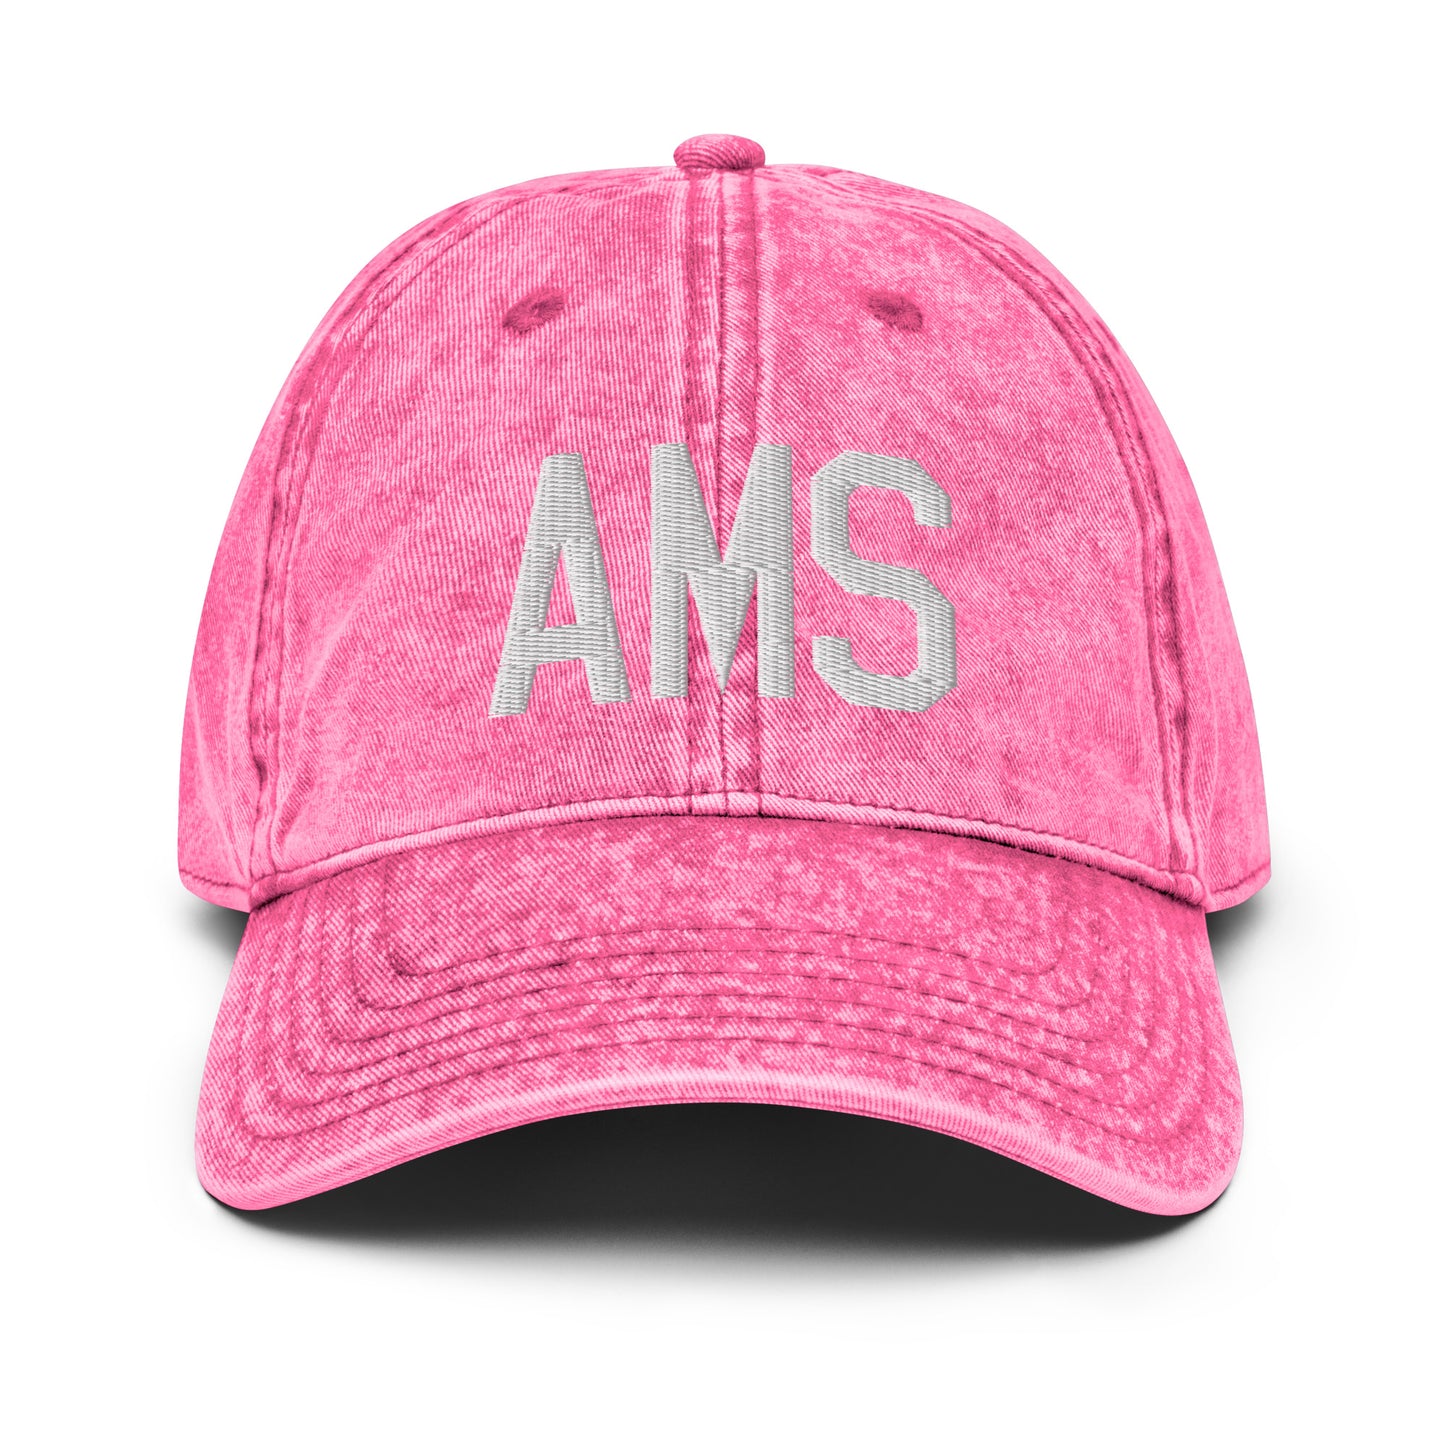 Airport Code Twill Cap - White • AMS Amsterdam • YHM Designs - Image 25